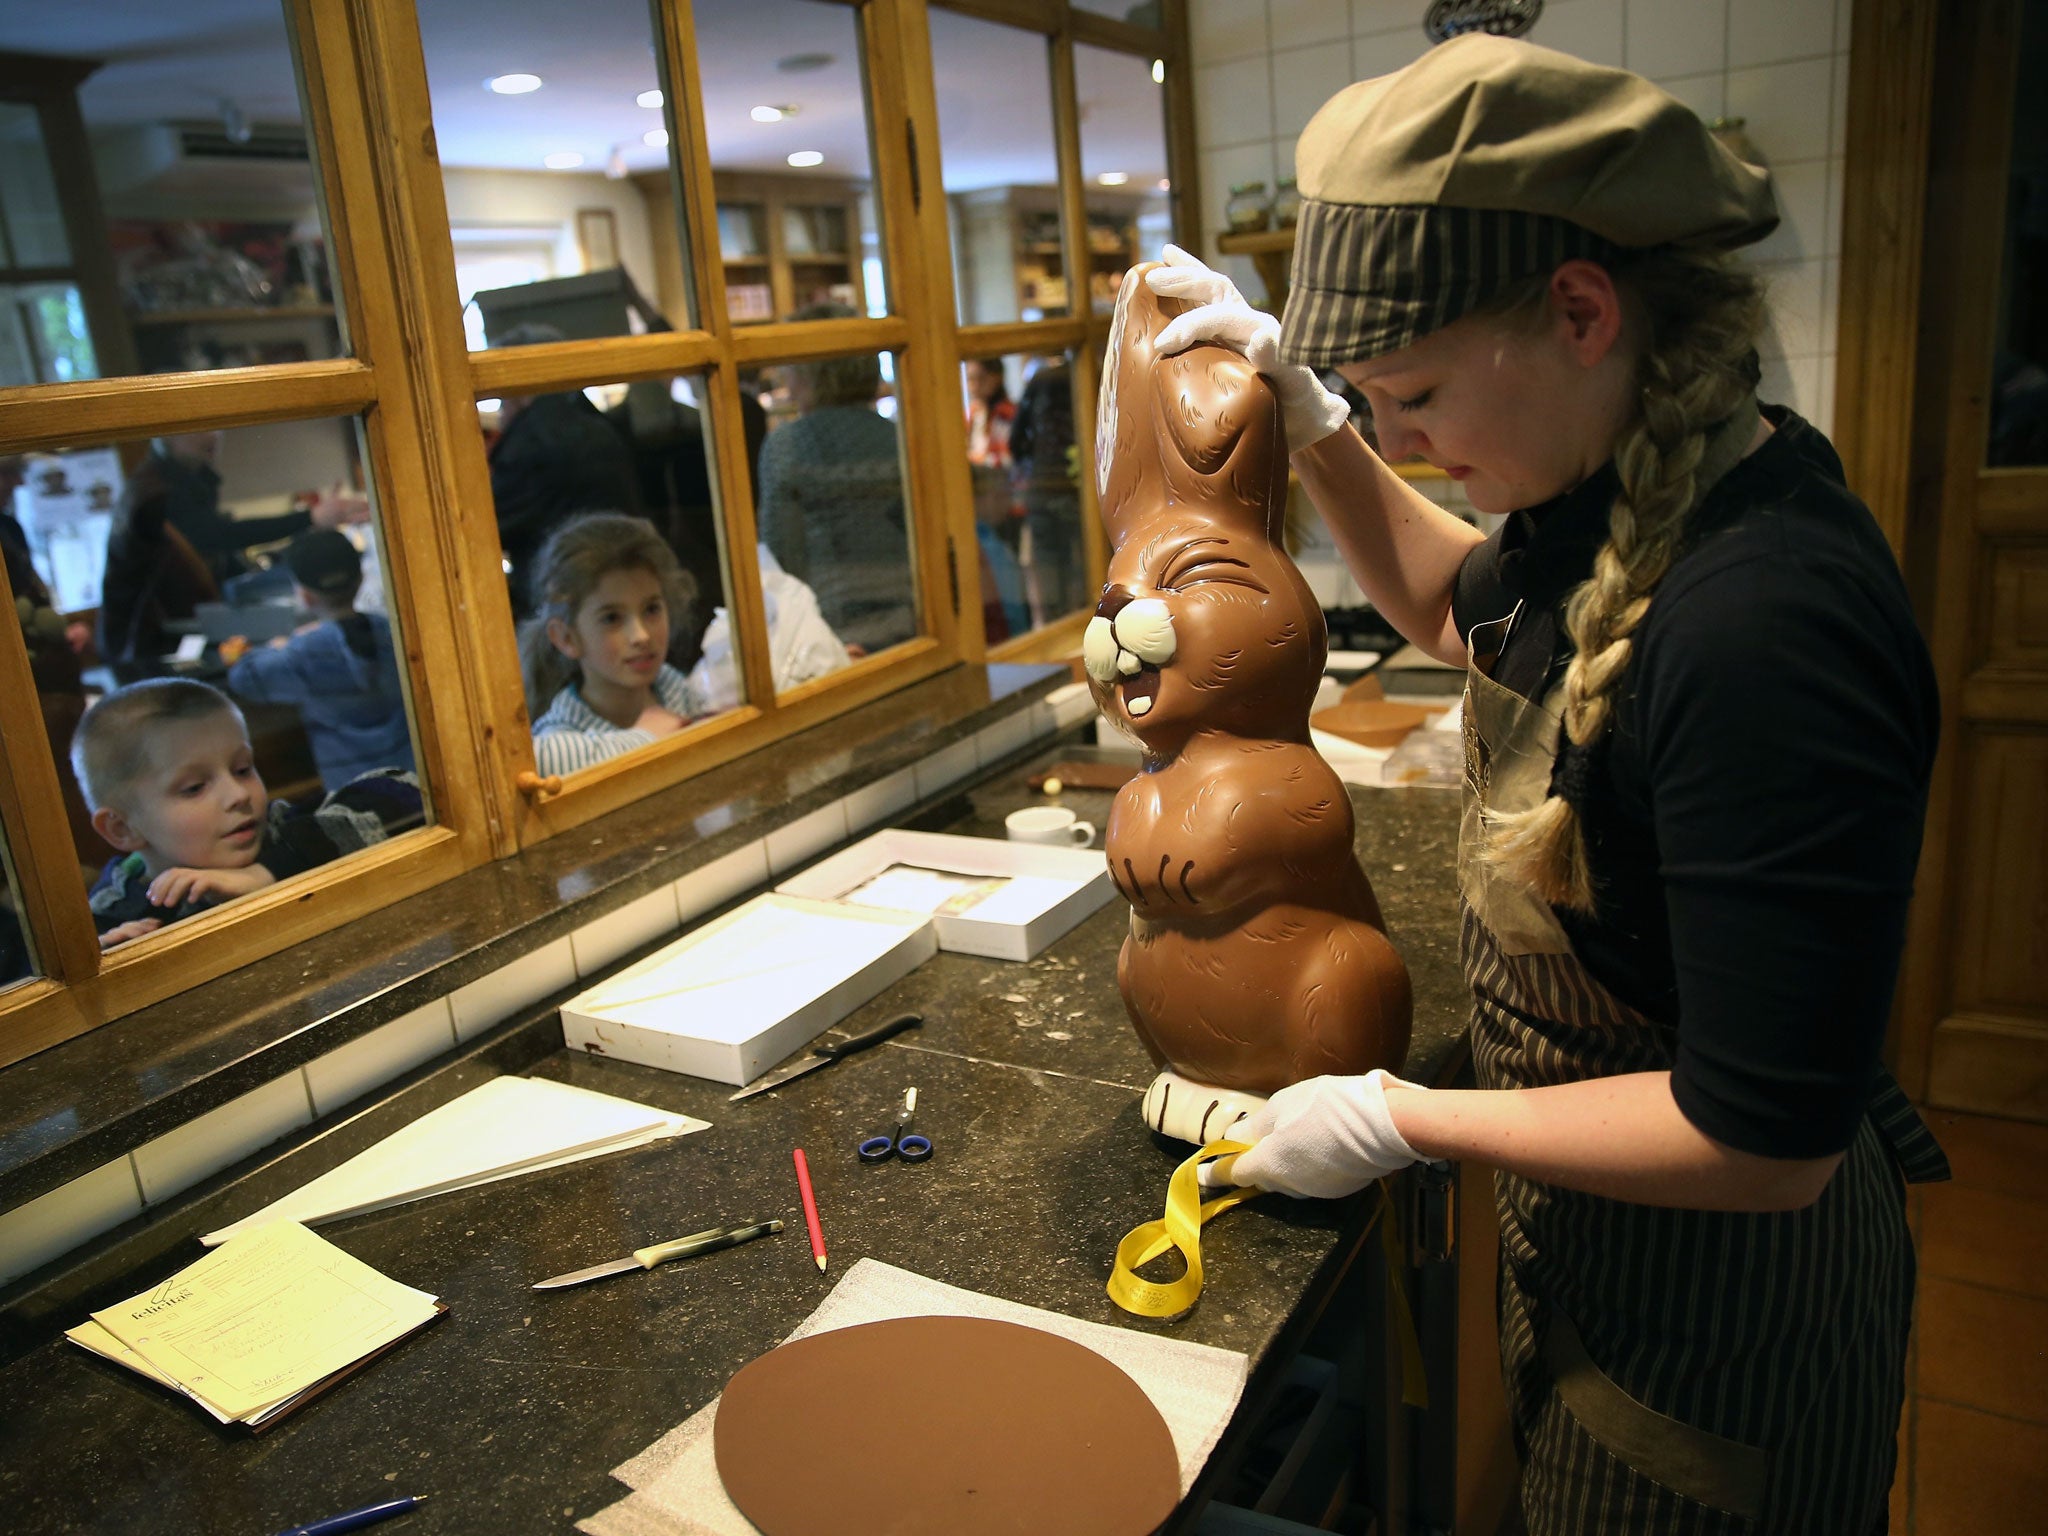 Children from a Polish tour group watch as employee Sandra Jaeckel prepares to take away a giant chocolate Easter bunny after showing it to them at Confiserie Felicitas chocolates maker in Hornow